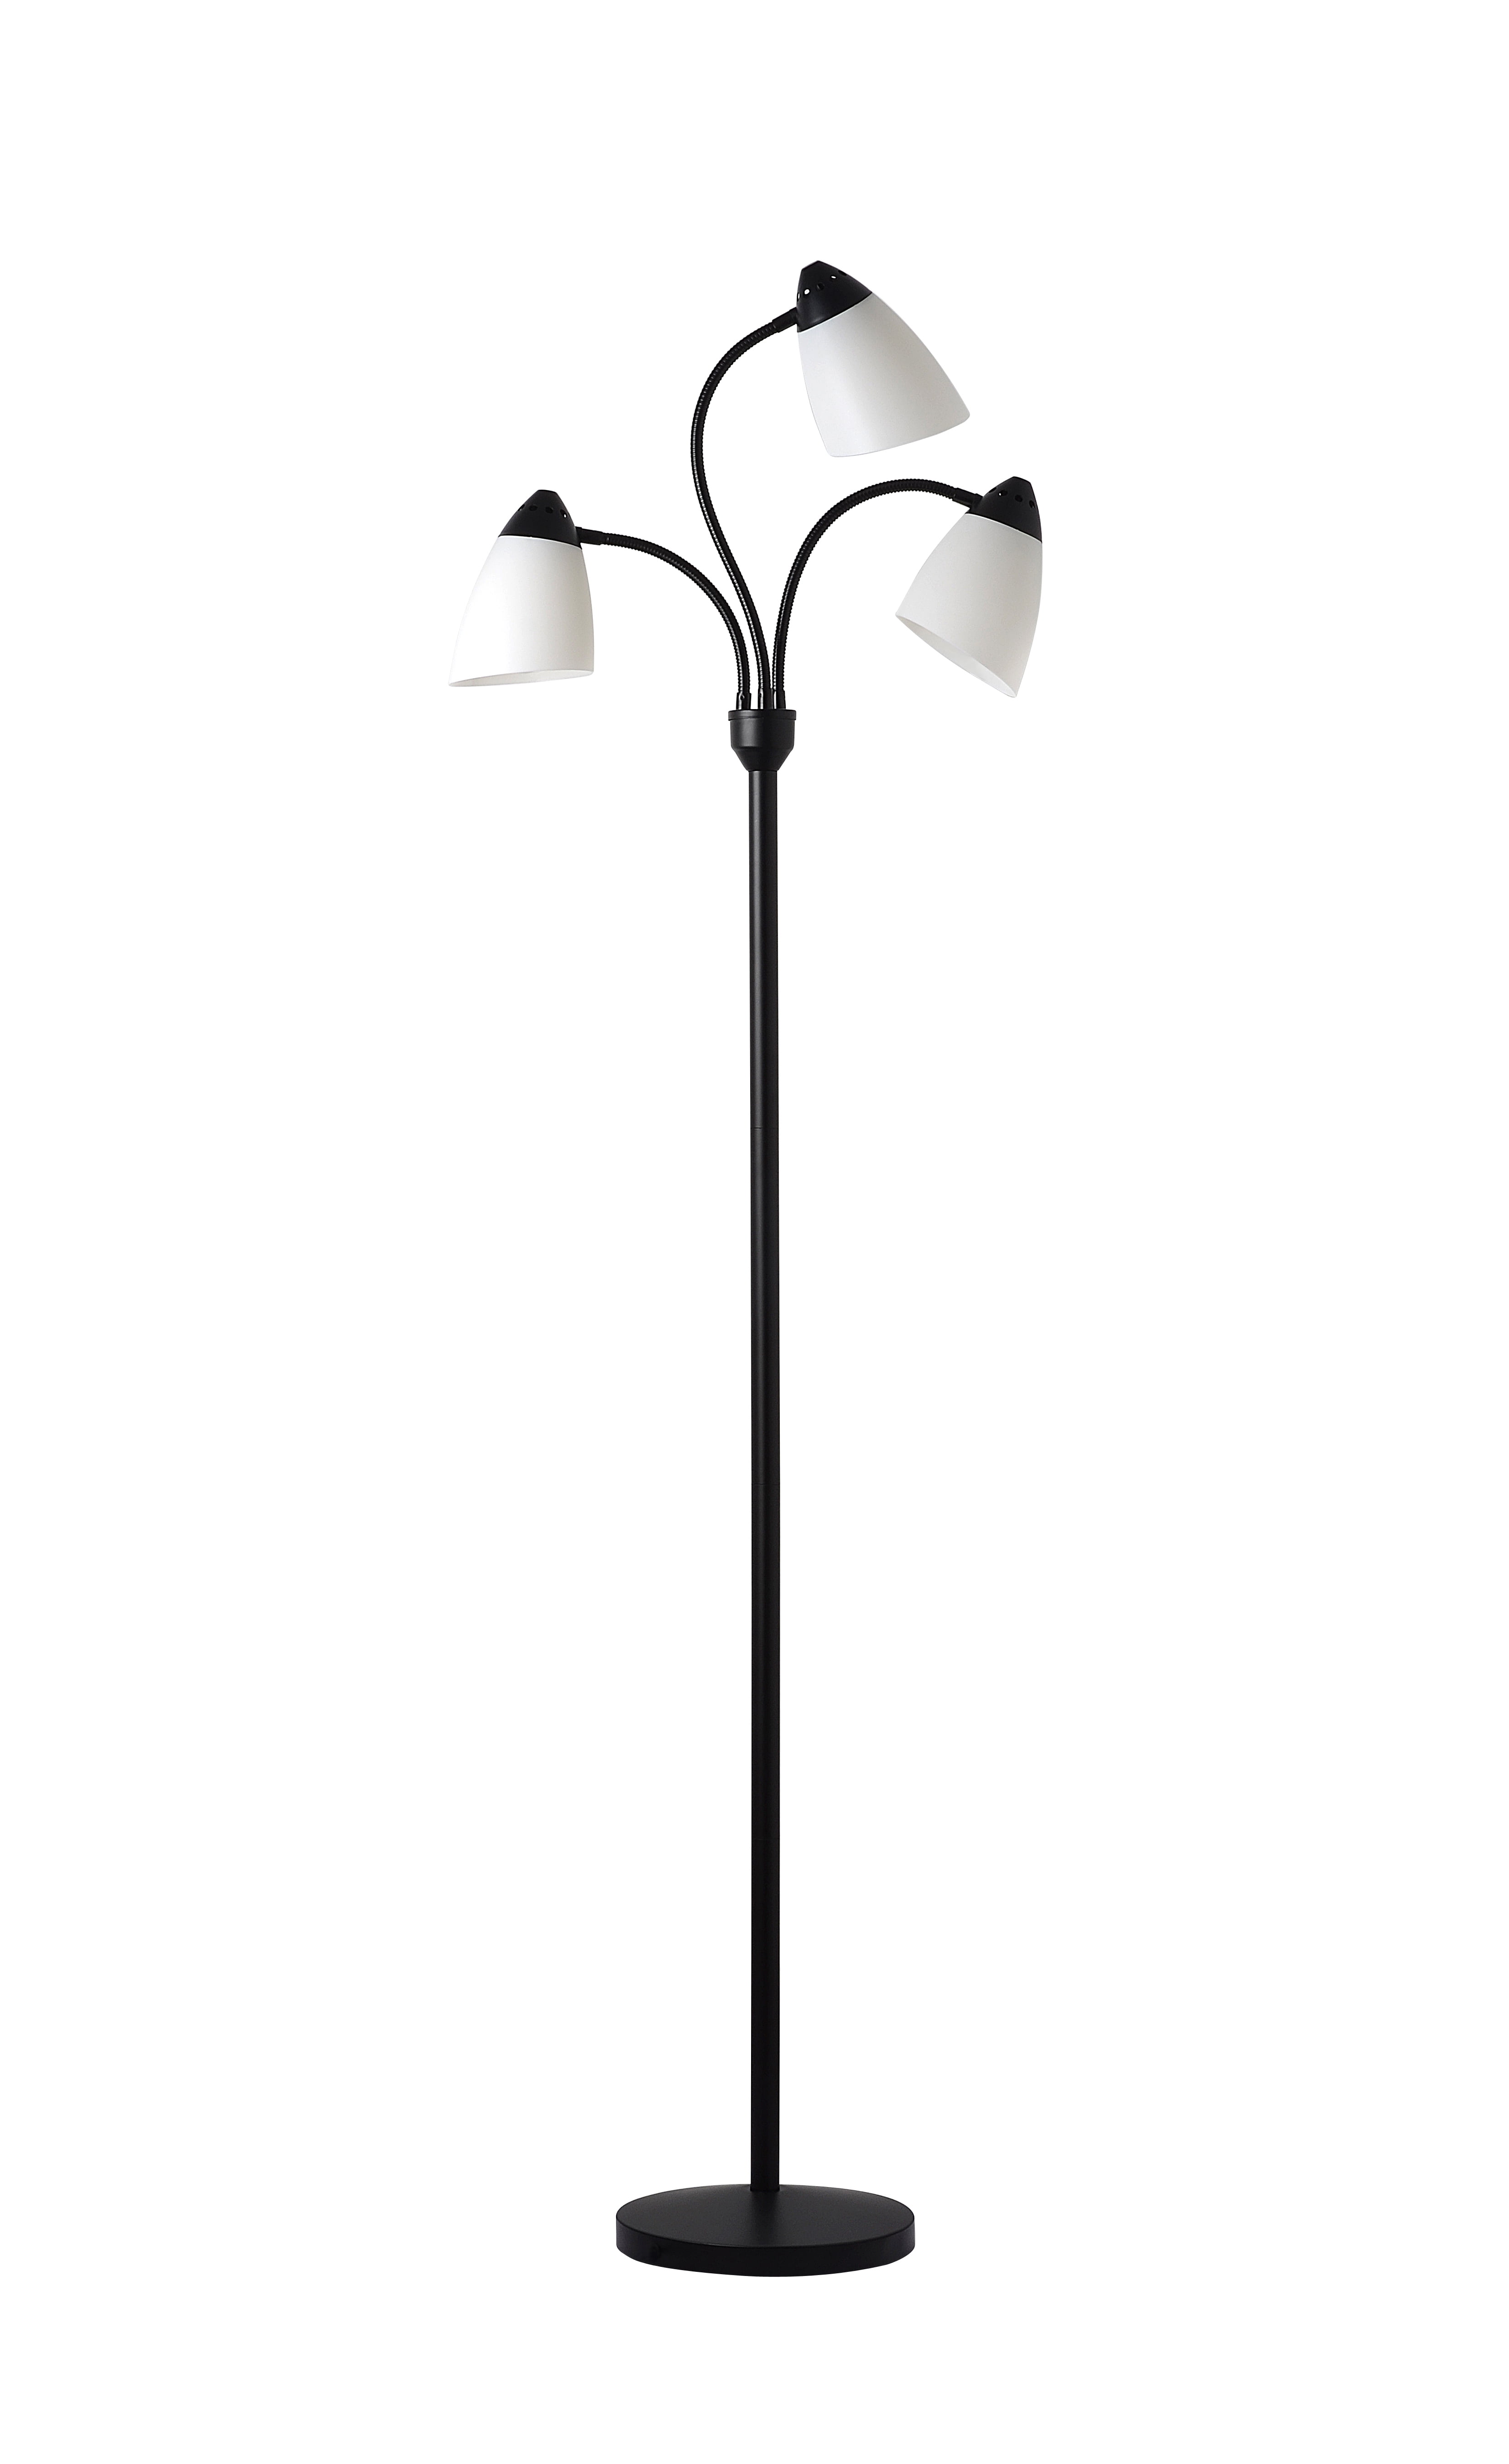 Mainstays 3 Head Floor Lamp Black With, Mainstays Floor Lamp Shade Replacement